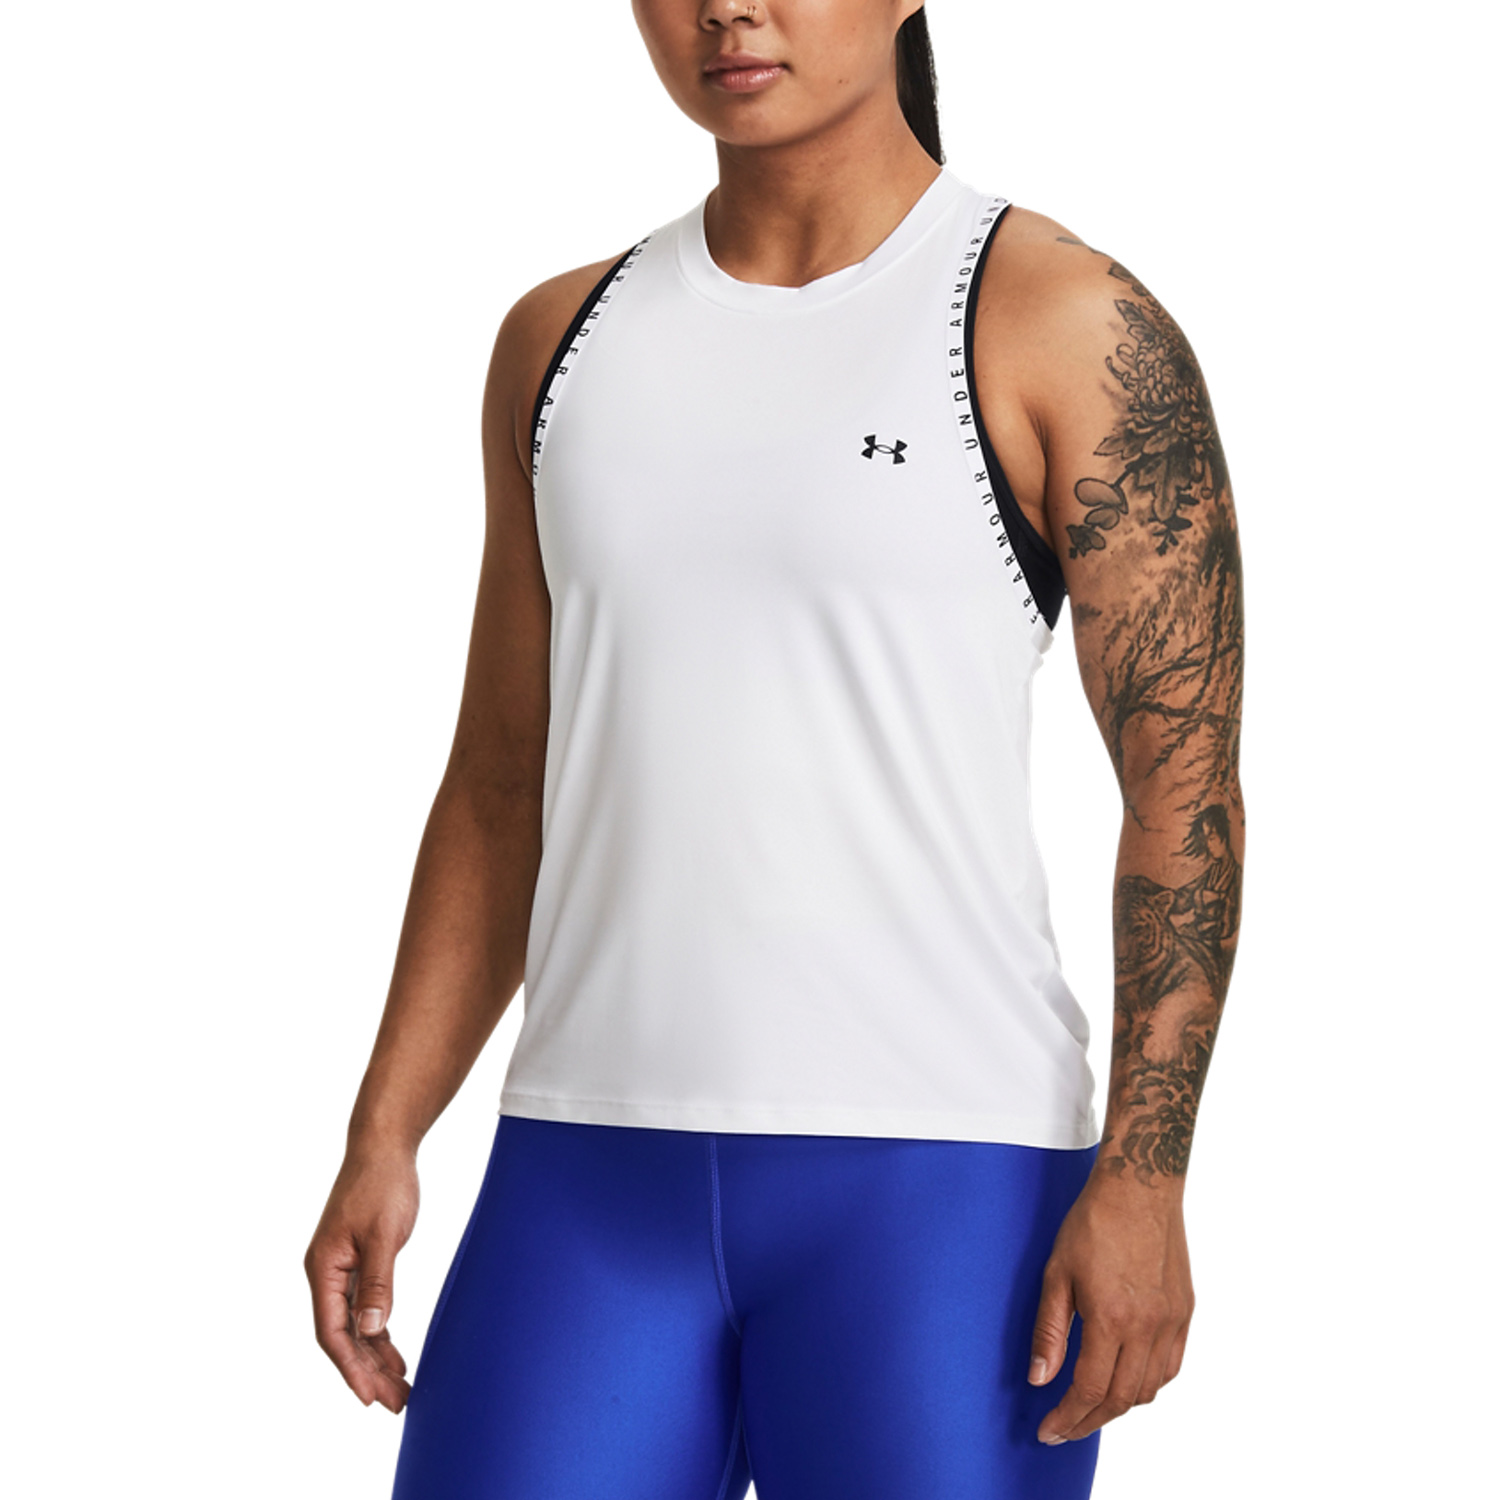 Under Armour Knockout Novelty Top - White/Reflective